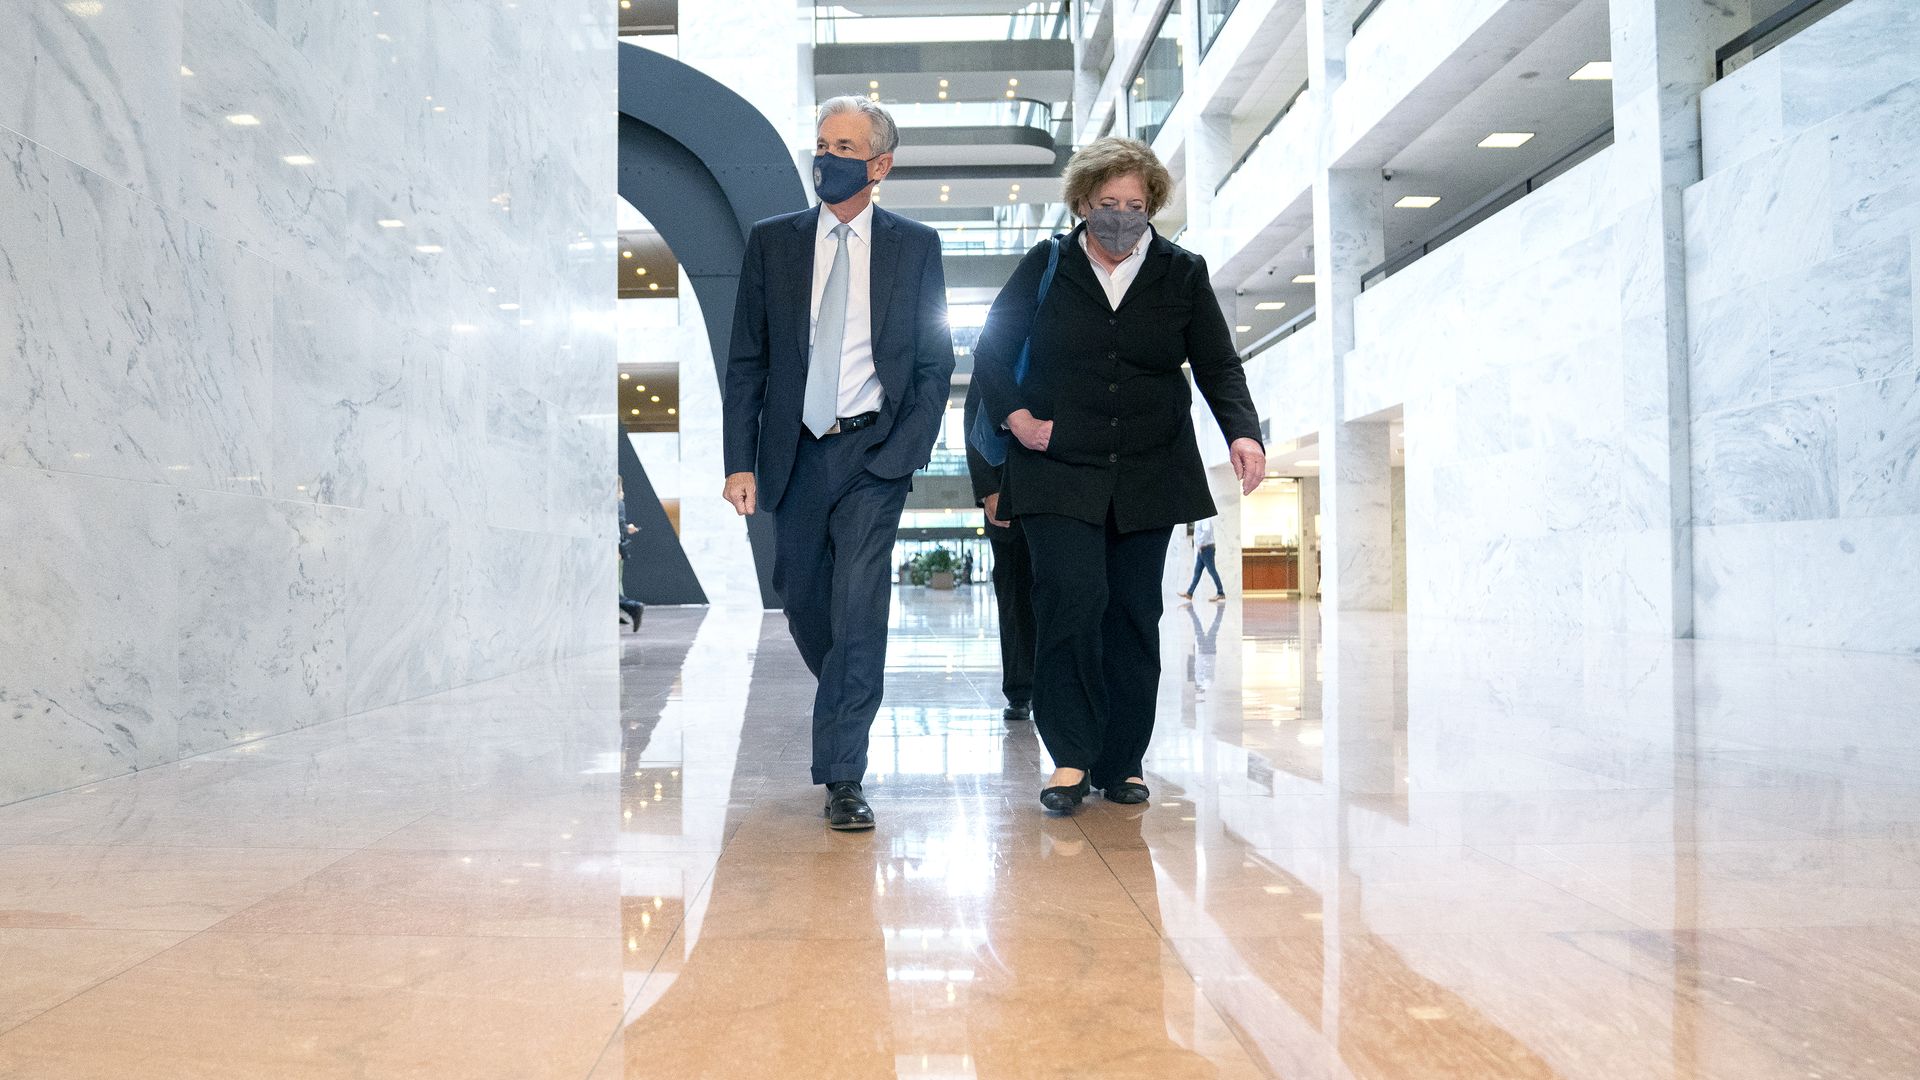 Federal Reserve Chairman Jerome Powell is seen walking through the Hart Senate Office Building.